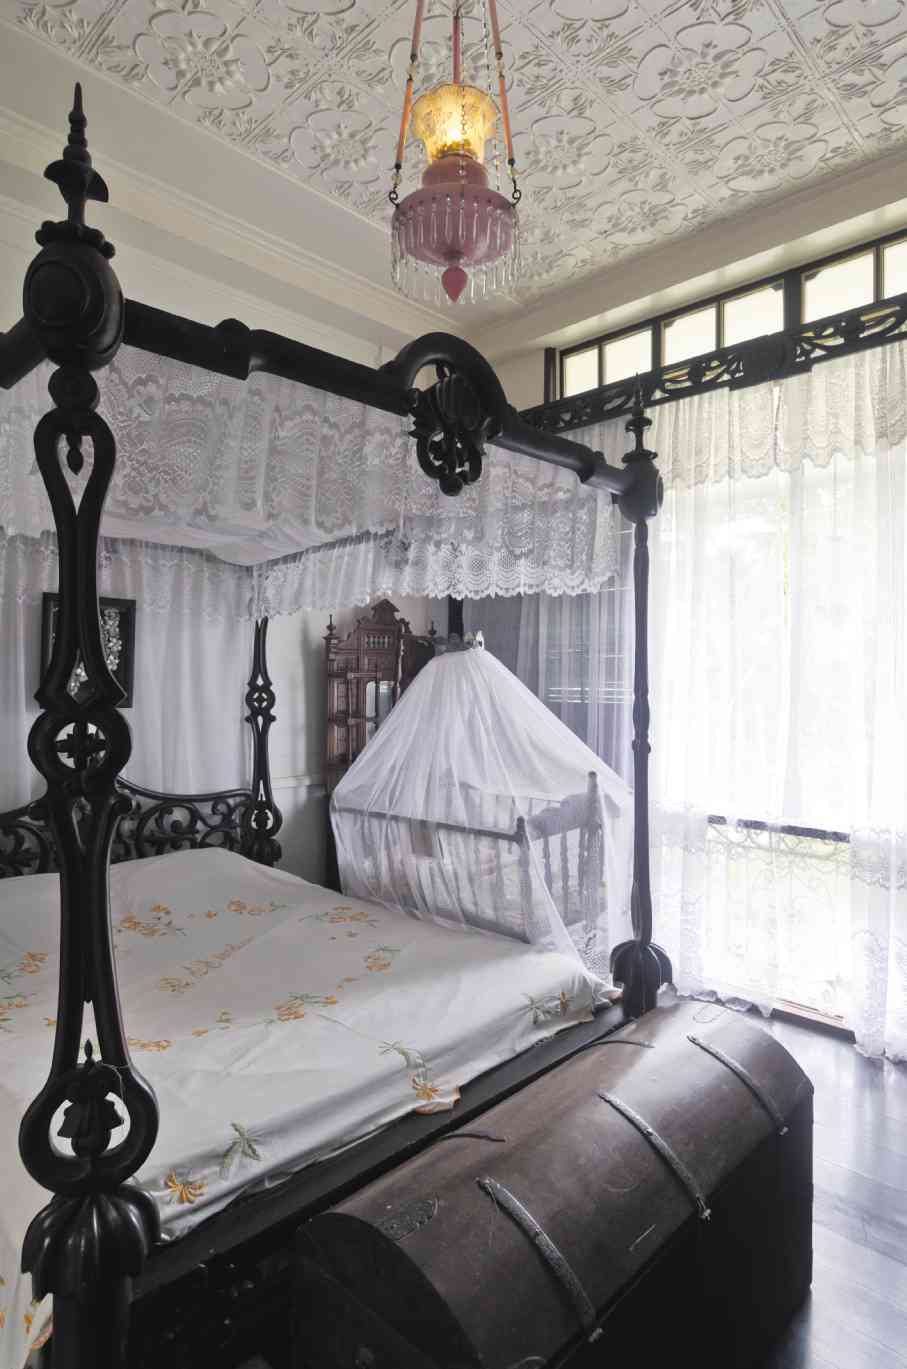 CARVED four poster bed with finials by famous Chinese maker Ah Tay